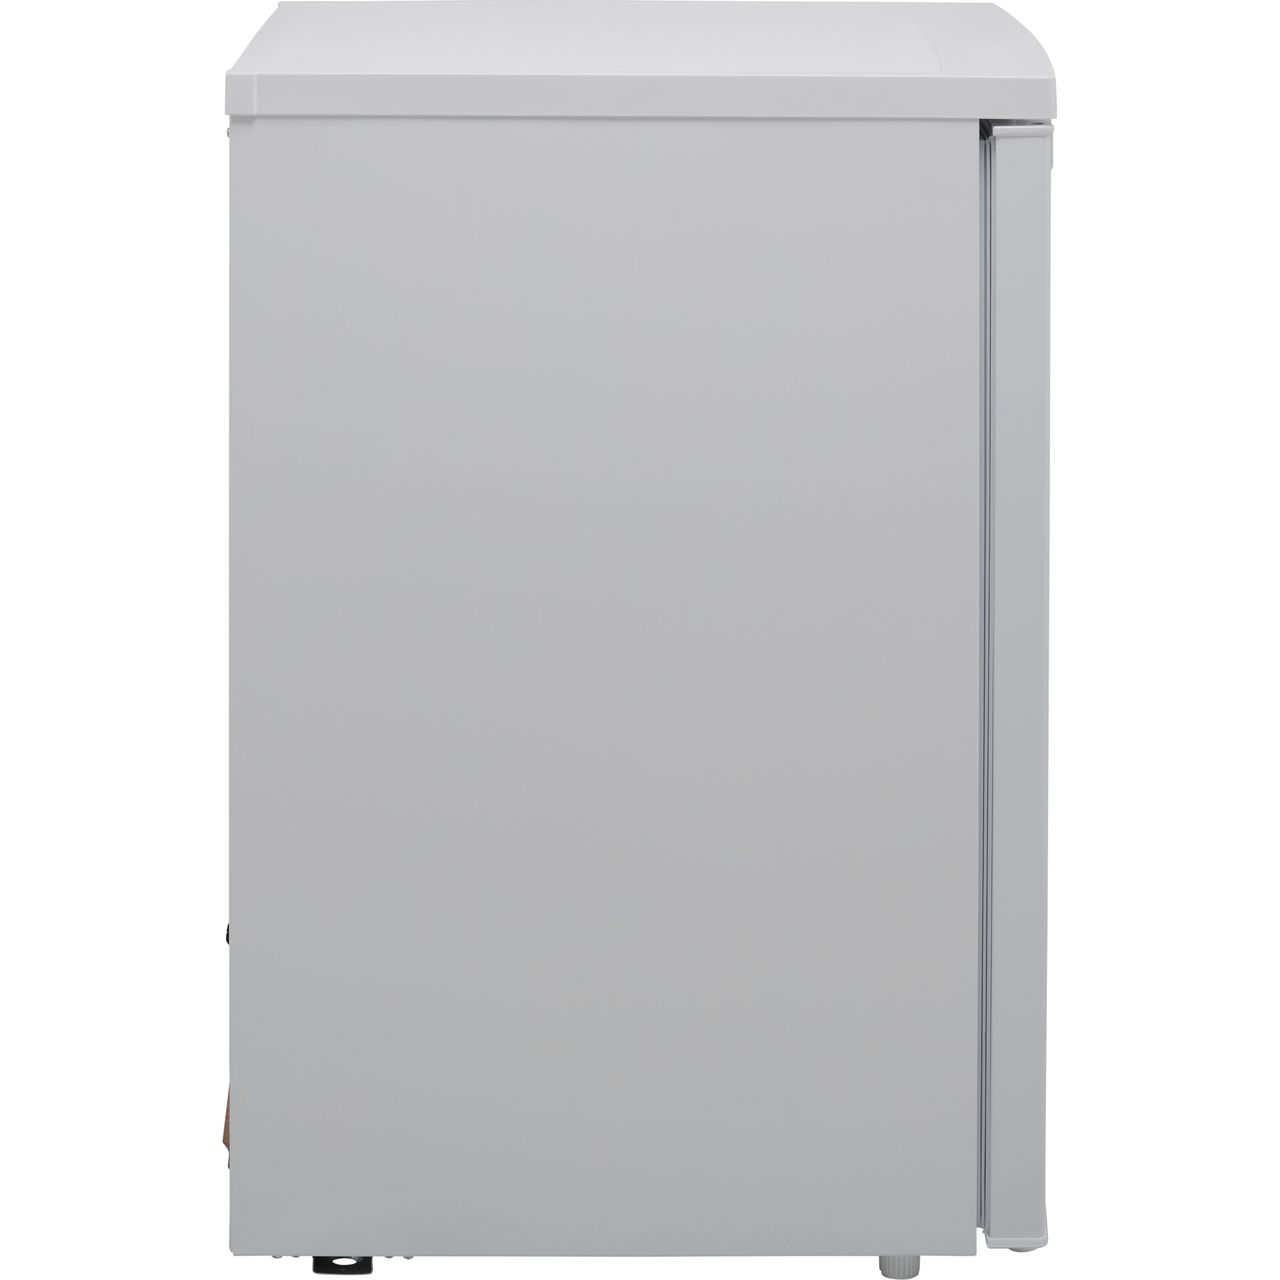 Are 2 Drawer Dishwashers Any Good?